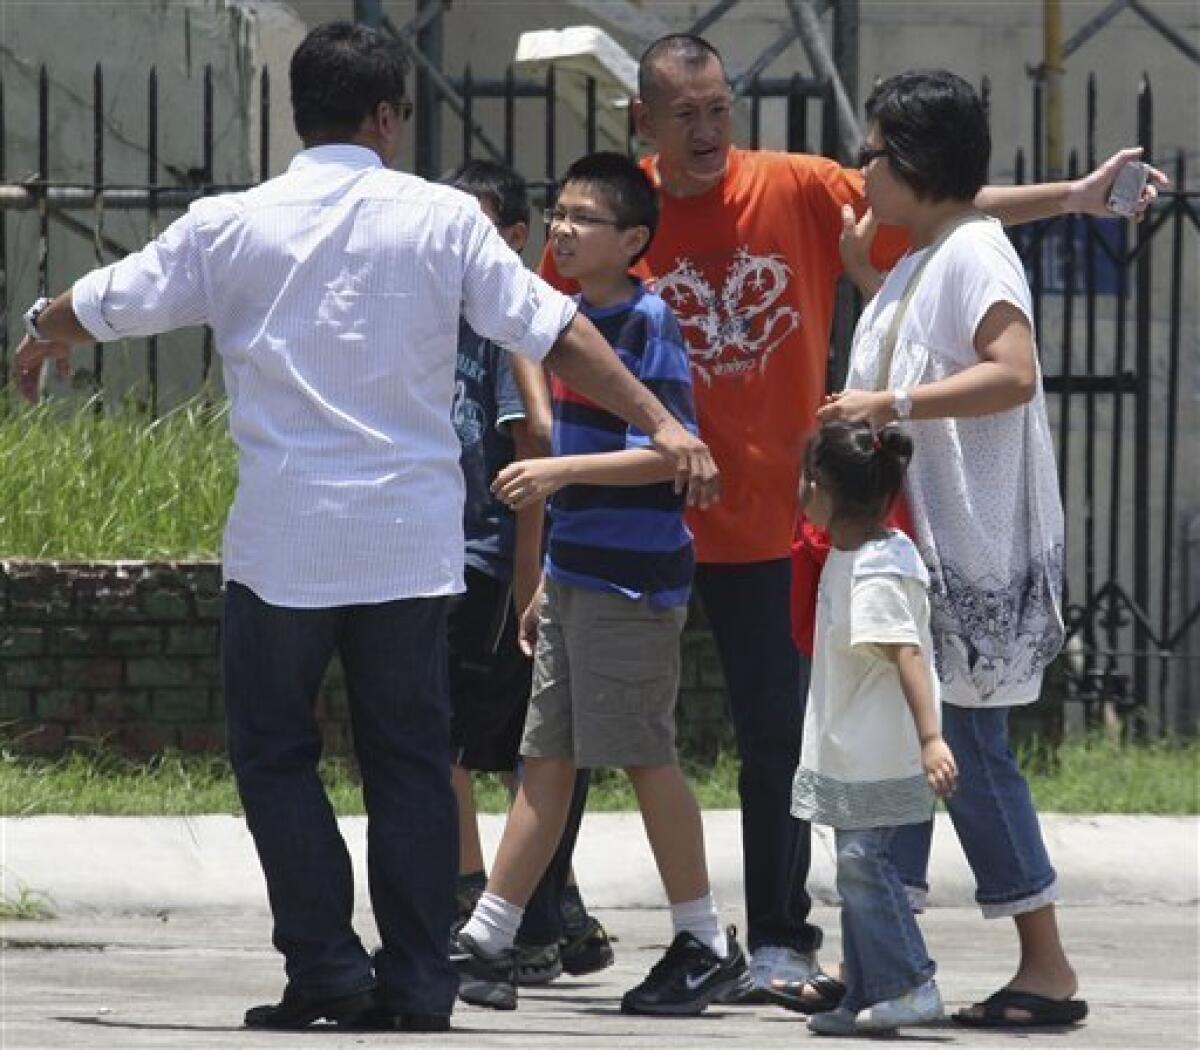 Hostage negotiators talk to foreign tourists taken hostage by former Senior Inspector Rolando Mendoza after securing their release at Manila's Rizal Park Monday, Aug. 23, 2010, in the Philippines. Mendoza, a dismissed policeman armed with an automatic rifle seized the bus in Manila Monday with 25 people aboard, most of them Hong Kong tourists, in a bid to demand reinstatement, police said. (AP Photo/Bullit Marquez)